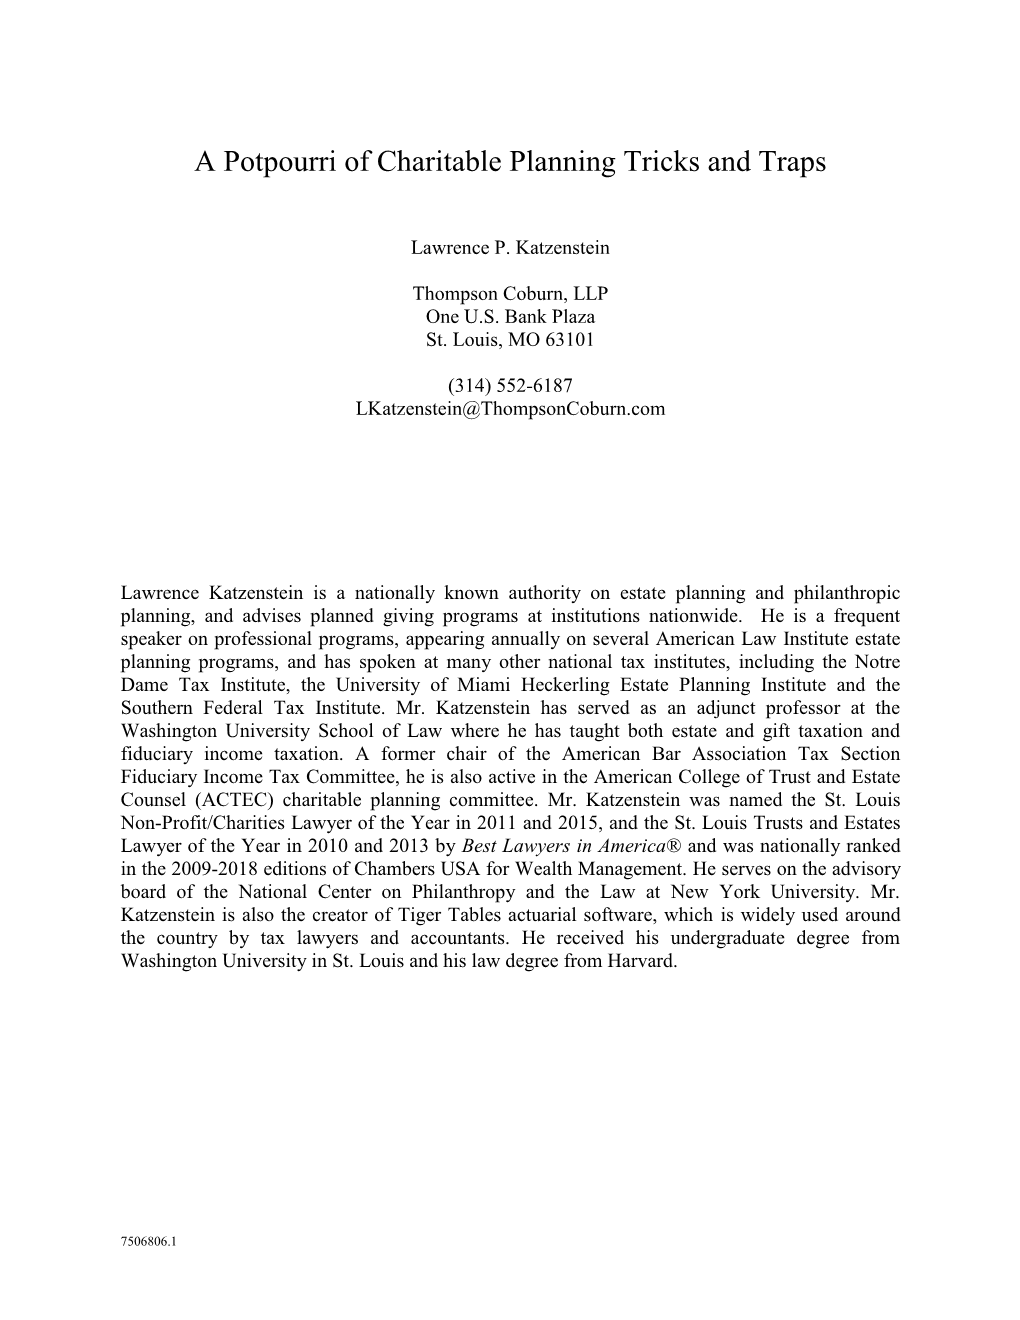 A Potpourri of Charitable Planning Tricks and Traps